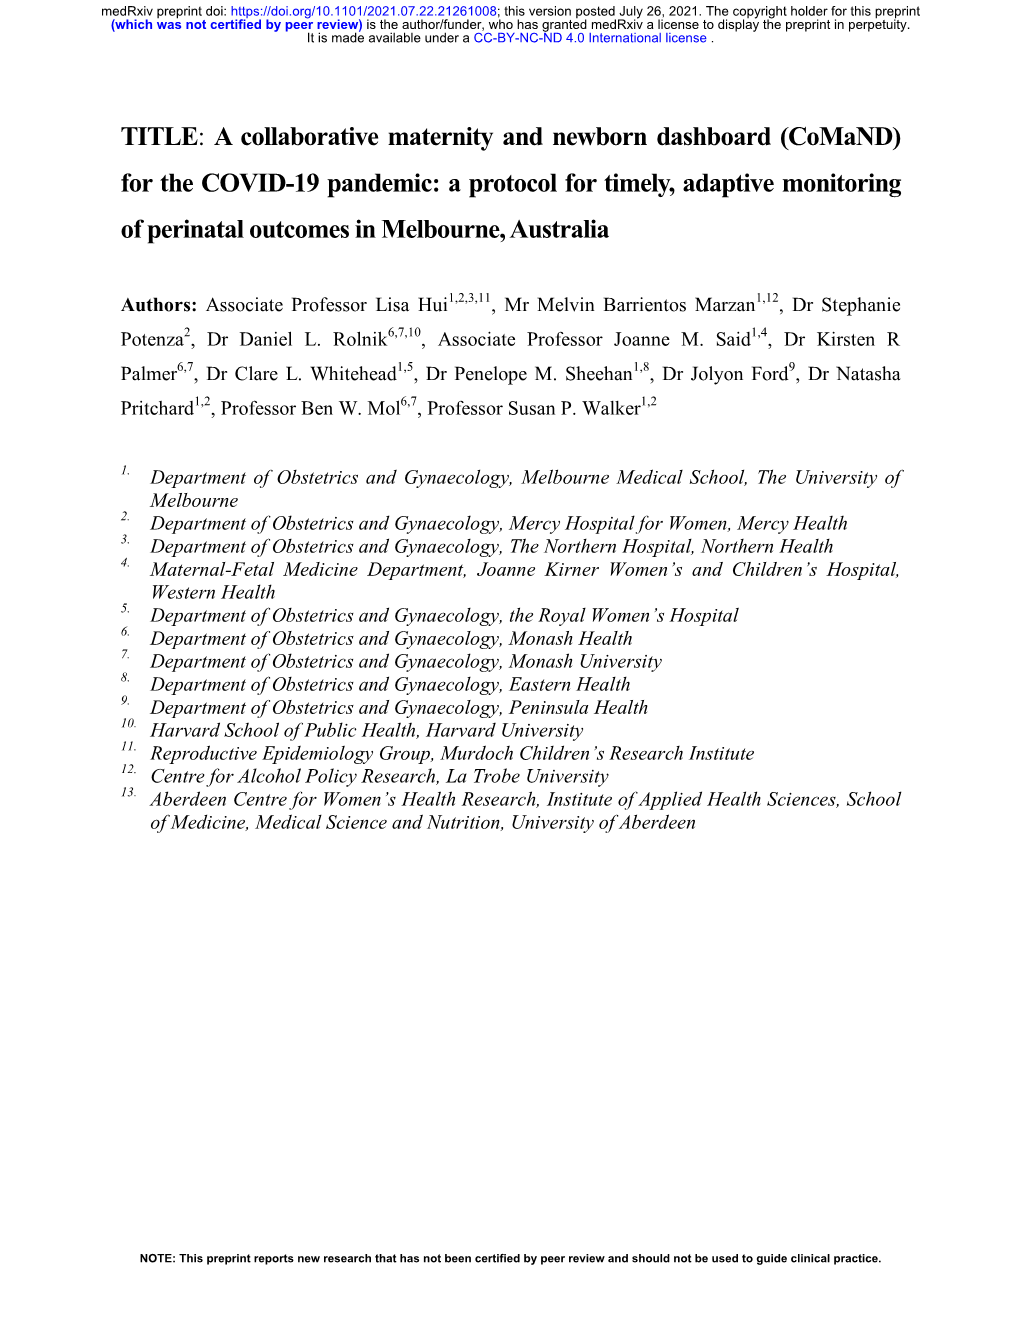 For the COVID-19 Pandemic: a Protocol for Timely, Adaptive Monitoring of Perinatal Outcomes in Melbourne, Australia